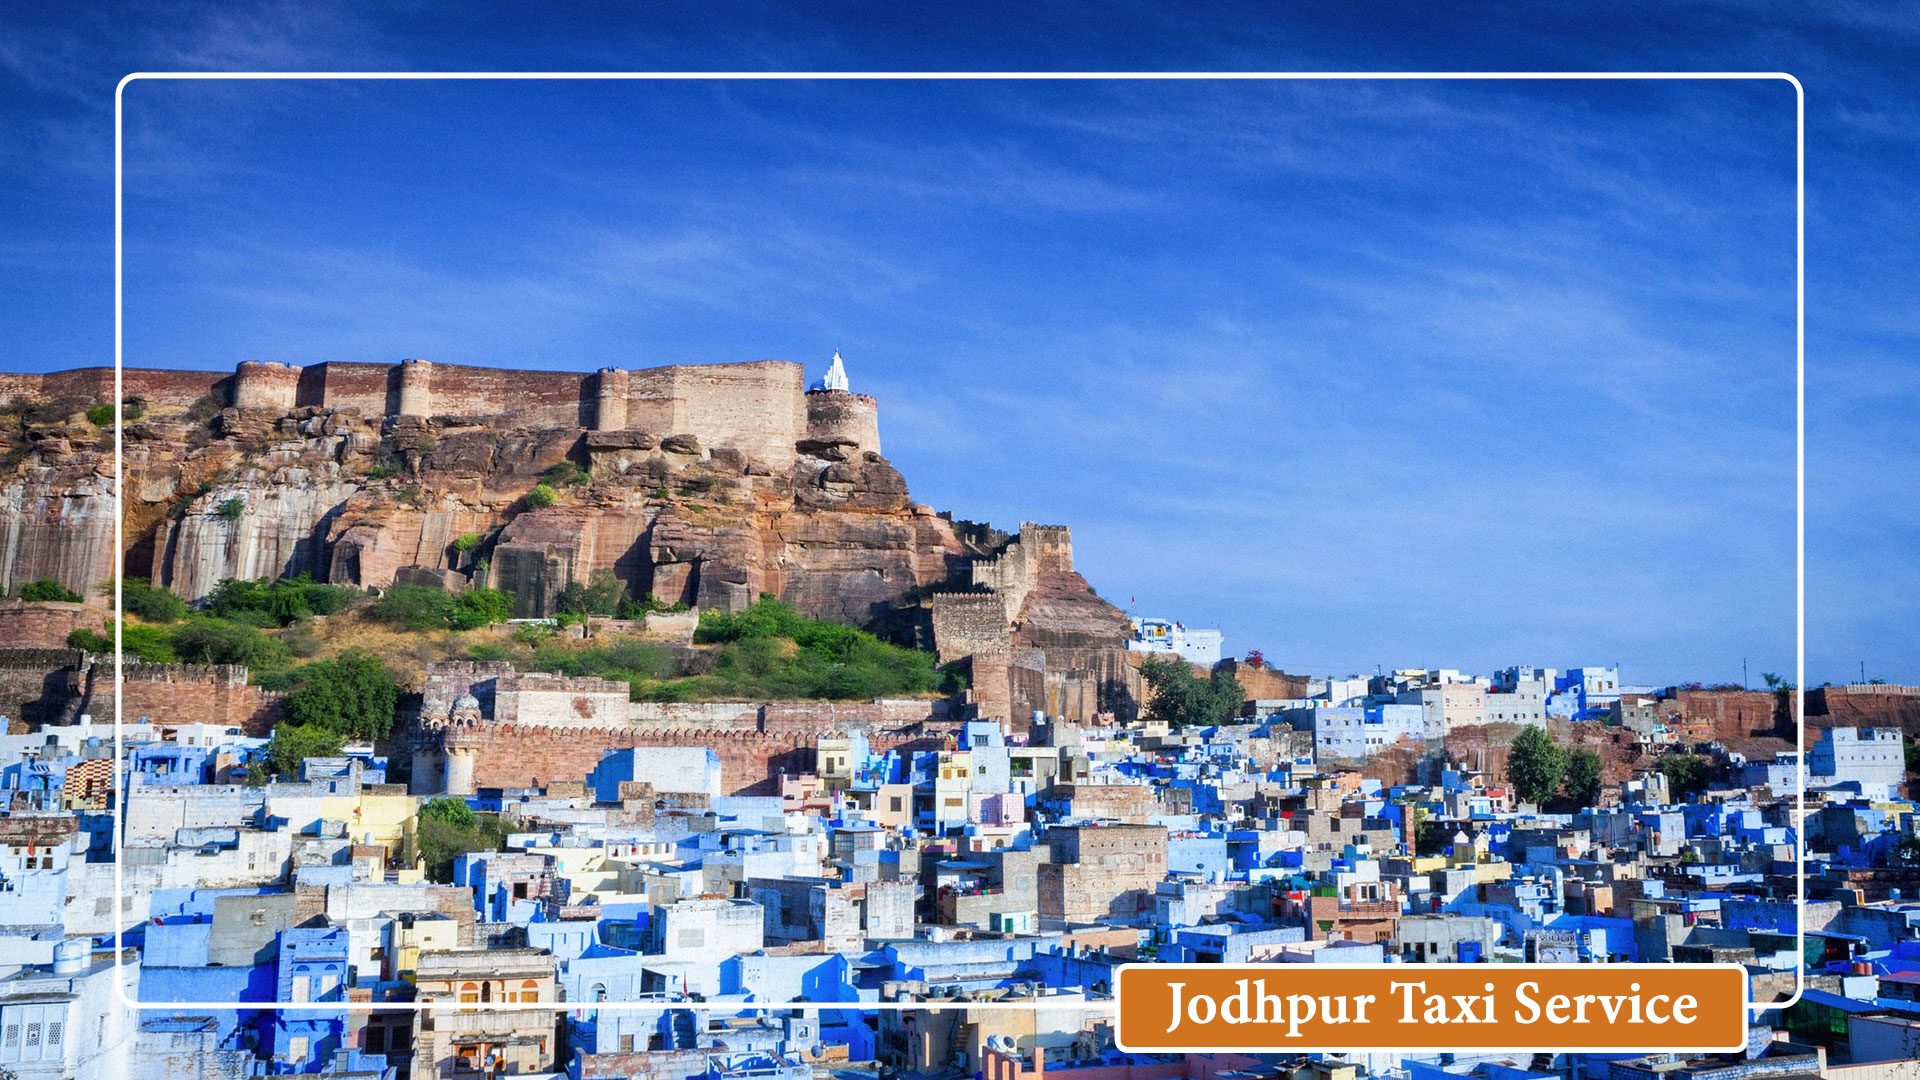 This image depicts the Jaipur to Jodhpur taxi service with a beautiful view of Jodhpur.